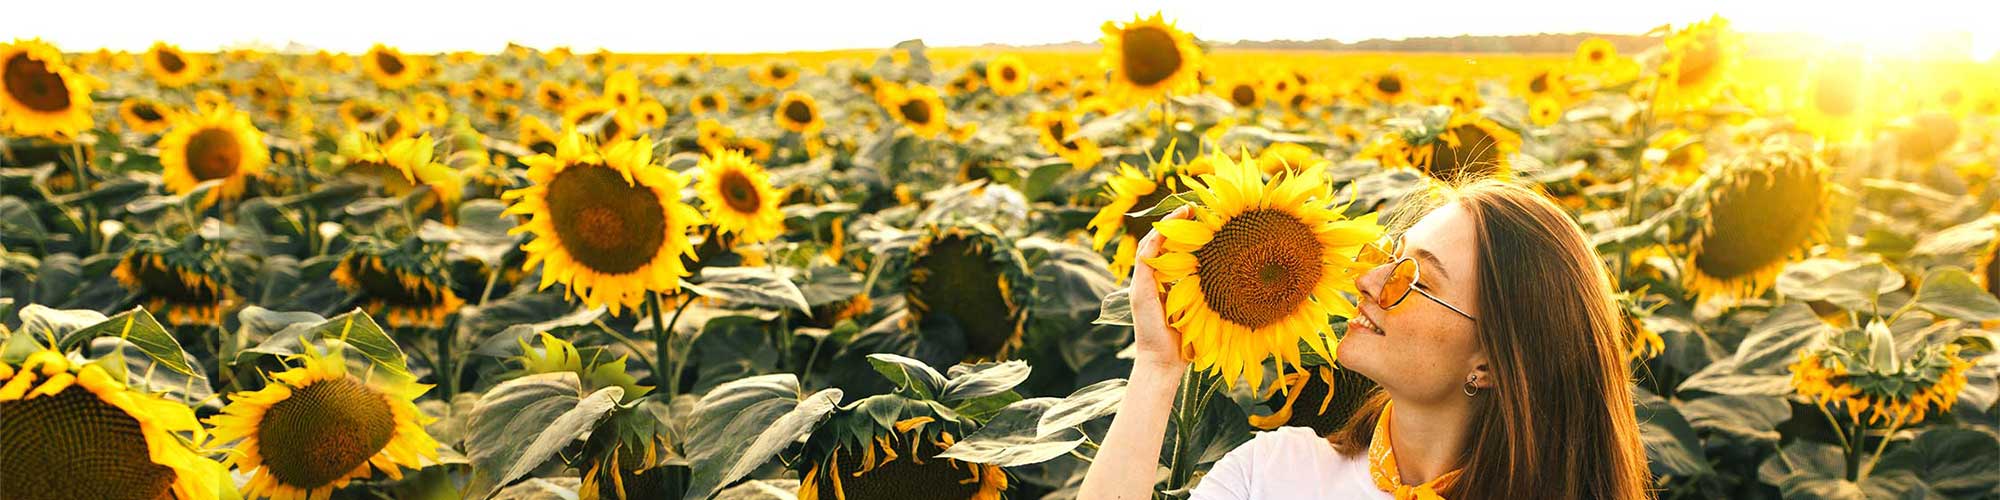 Plan your visit to the Sunflower Festival at Richardsons!